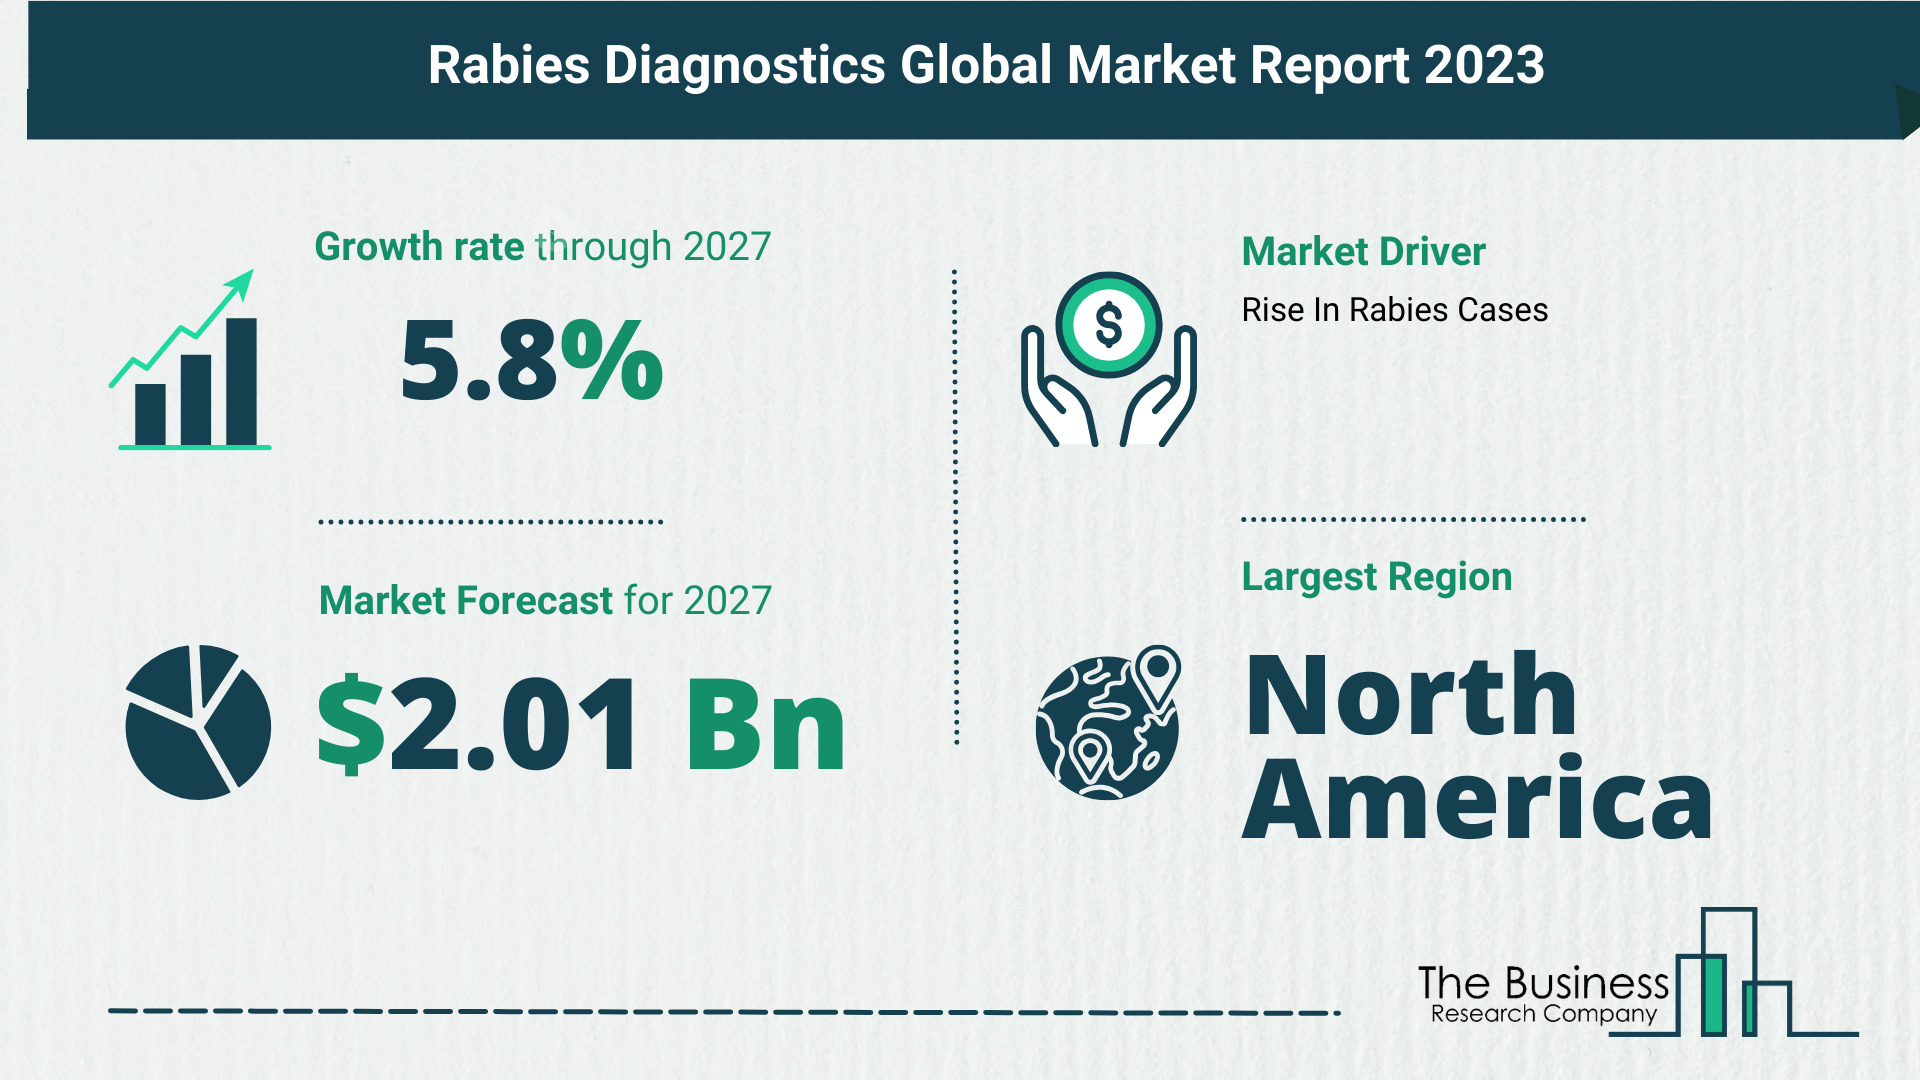 Top 5 Insights From The Rabies Diagnostics Market Report 2023